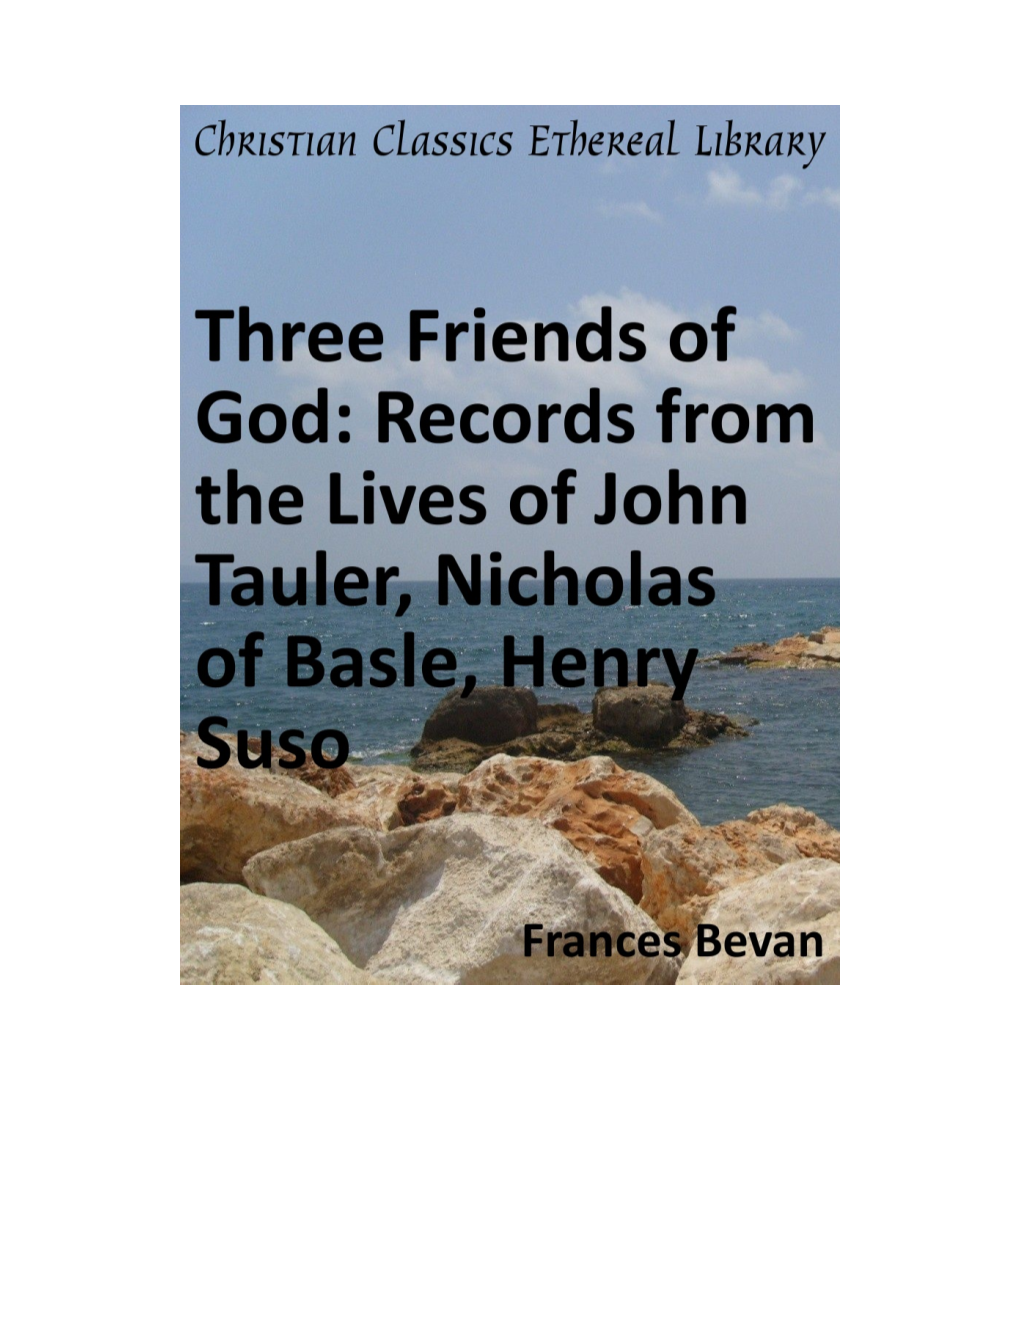 Three Friends of God: Records from the Lives of John Tauler, Nicholas of Basle, Henry Suso